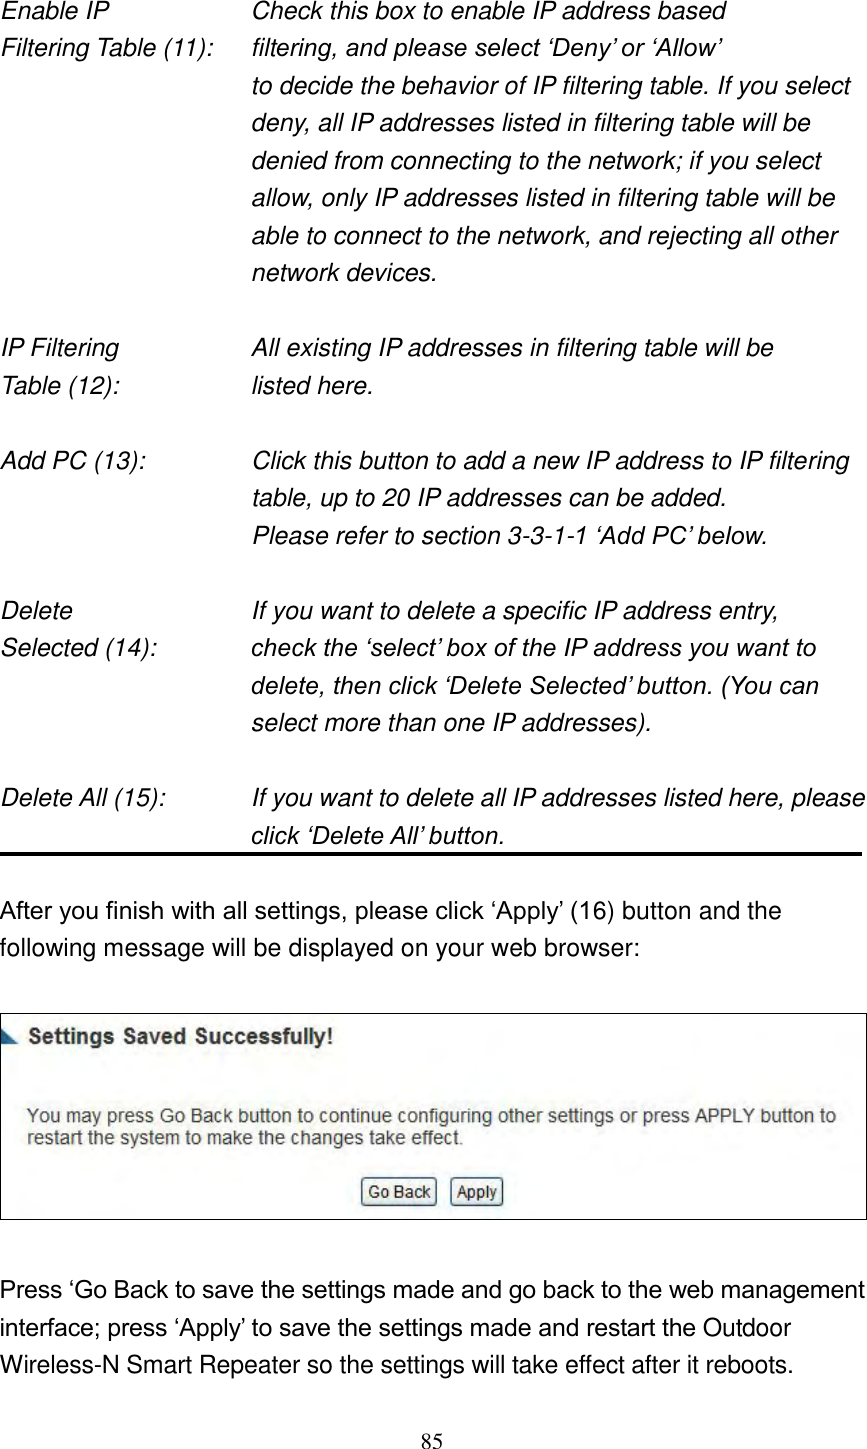 85  Enable IP        Check this box to enable IP address based Filtering Table (11):  filtering, and please select „Deny‟ or „Allow‟   to decide the behavior of IP filtering table. If you select deny, all IP addresses listed in filtering table will be denied from connecting to the network; if you select allow, only IP addresses listed in filtering table will be able to connect to the network, and rejecting all other network devices.  IP Filtering        All existing IP addresses in filtering table will be Table (12):        listed here.  Add PC (13):    Click this button to add a new IP address to IP filtering table, up to 20 IP addresses can be added.   Please refer to section 3-3-1-1 „Add PC‟ below.    Delete          If you want to delete a specific IP address entry, Selected (14):    check the „select‟ box of the IP address you want to delete, then click „Delete Selected‟ button. (You can select more than one IP addresses).  Delete All (15):    If you want to delete all IP addresses listed here, please click „Delete All‟ button.  After you finish with all settings, please click „Apply‟ (16) button and the following message will be displayed on your web browser:    Press „Go Back to save the settings made and go back to the web management interface; press „Apply‟ to save the settings made and restart the Outdoor Wireless-N Smart Repeater so the settings will take effect after it reboots. 